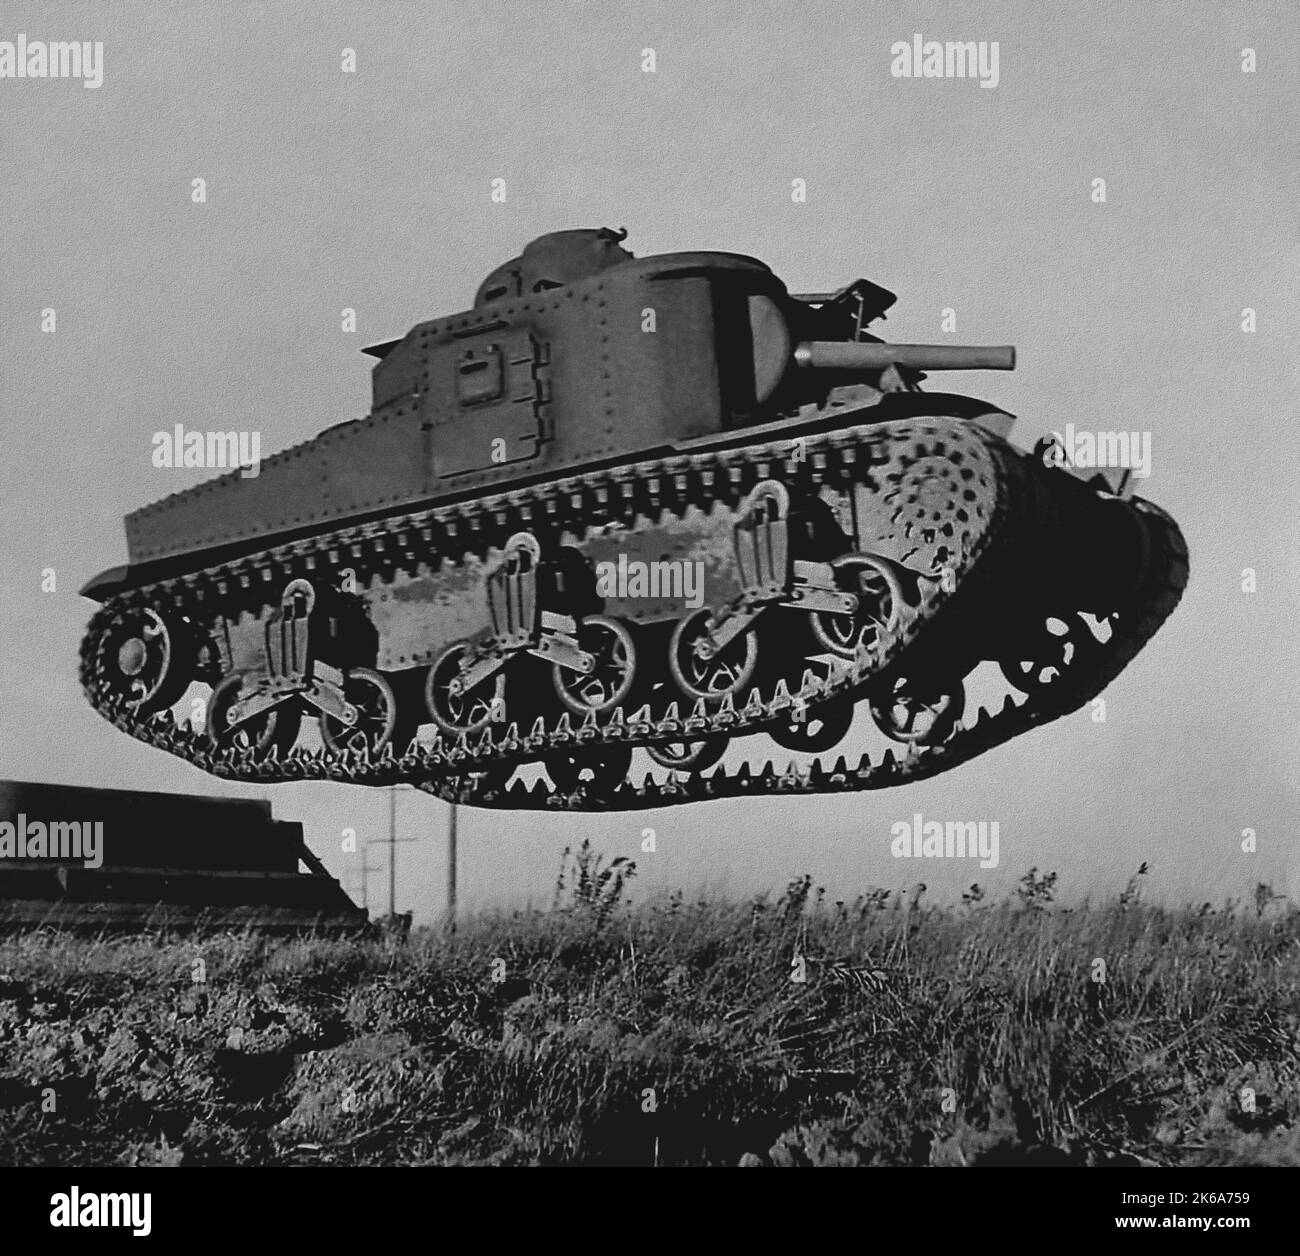 An M3 Lee tank getting air during training, WWII. Stock Photo